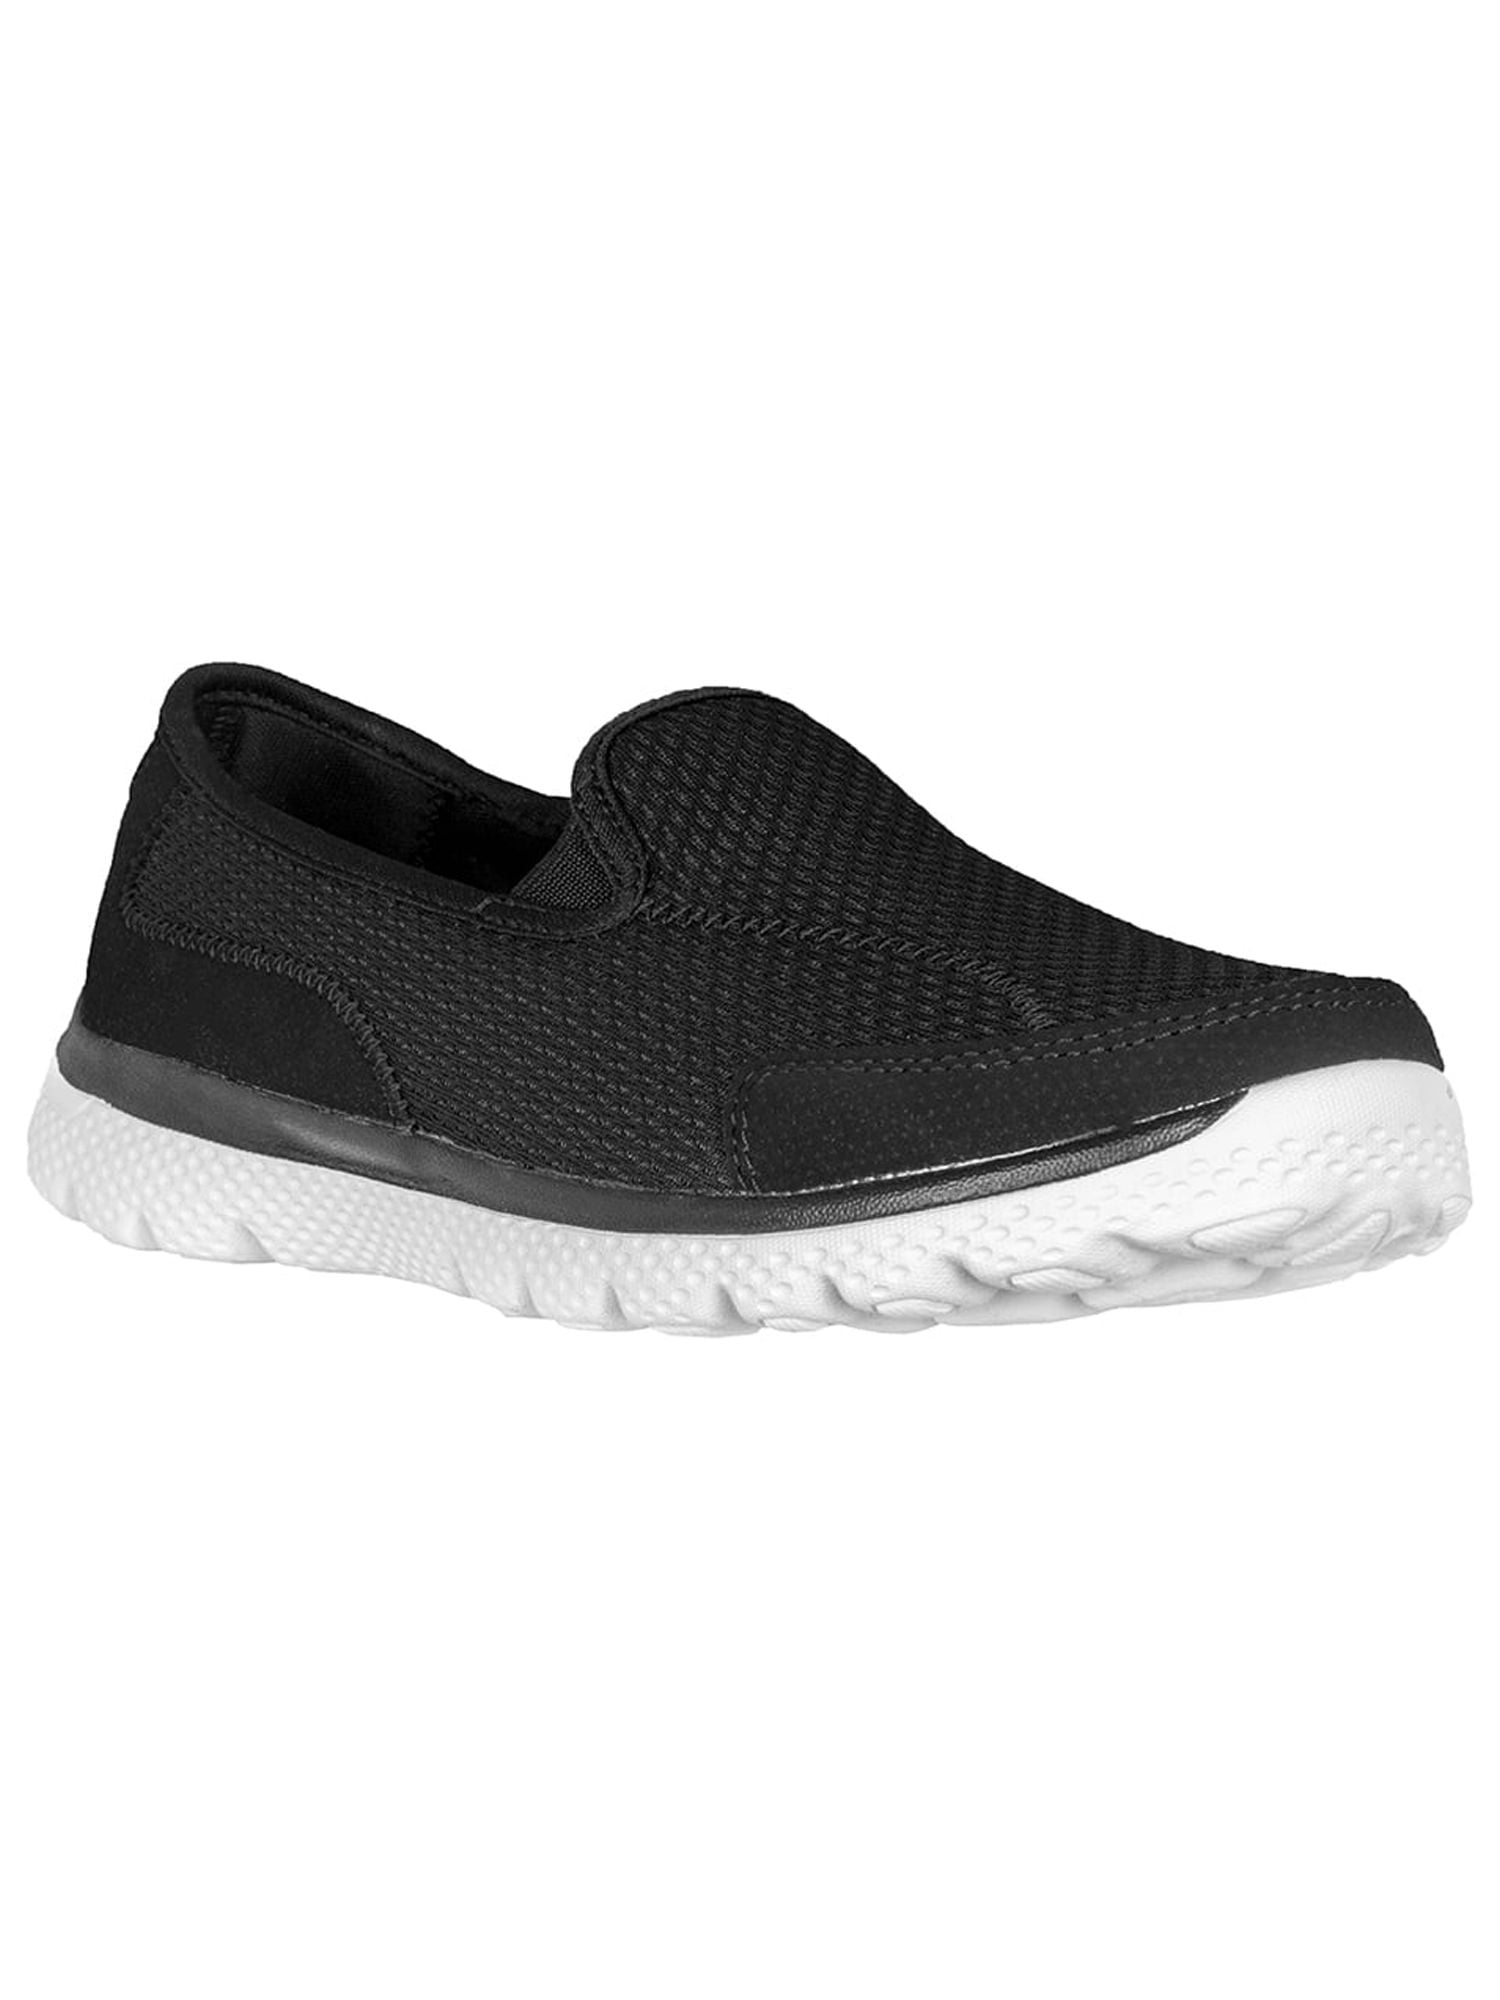 Athletic Works Women's Medium and Wide Width Knit Slip on Shoe ...